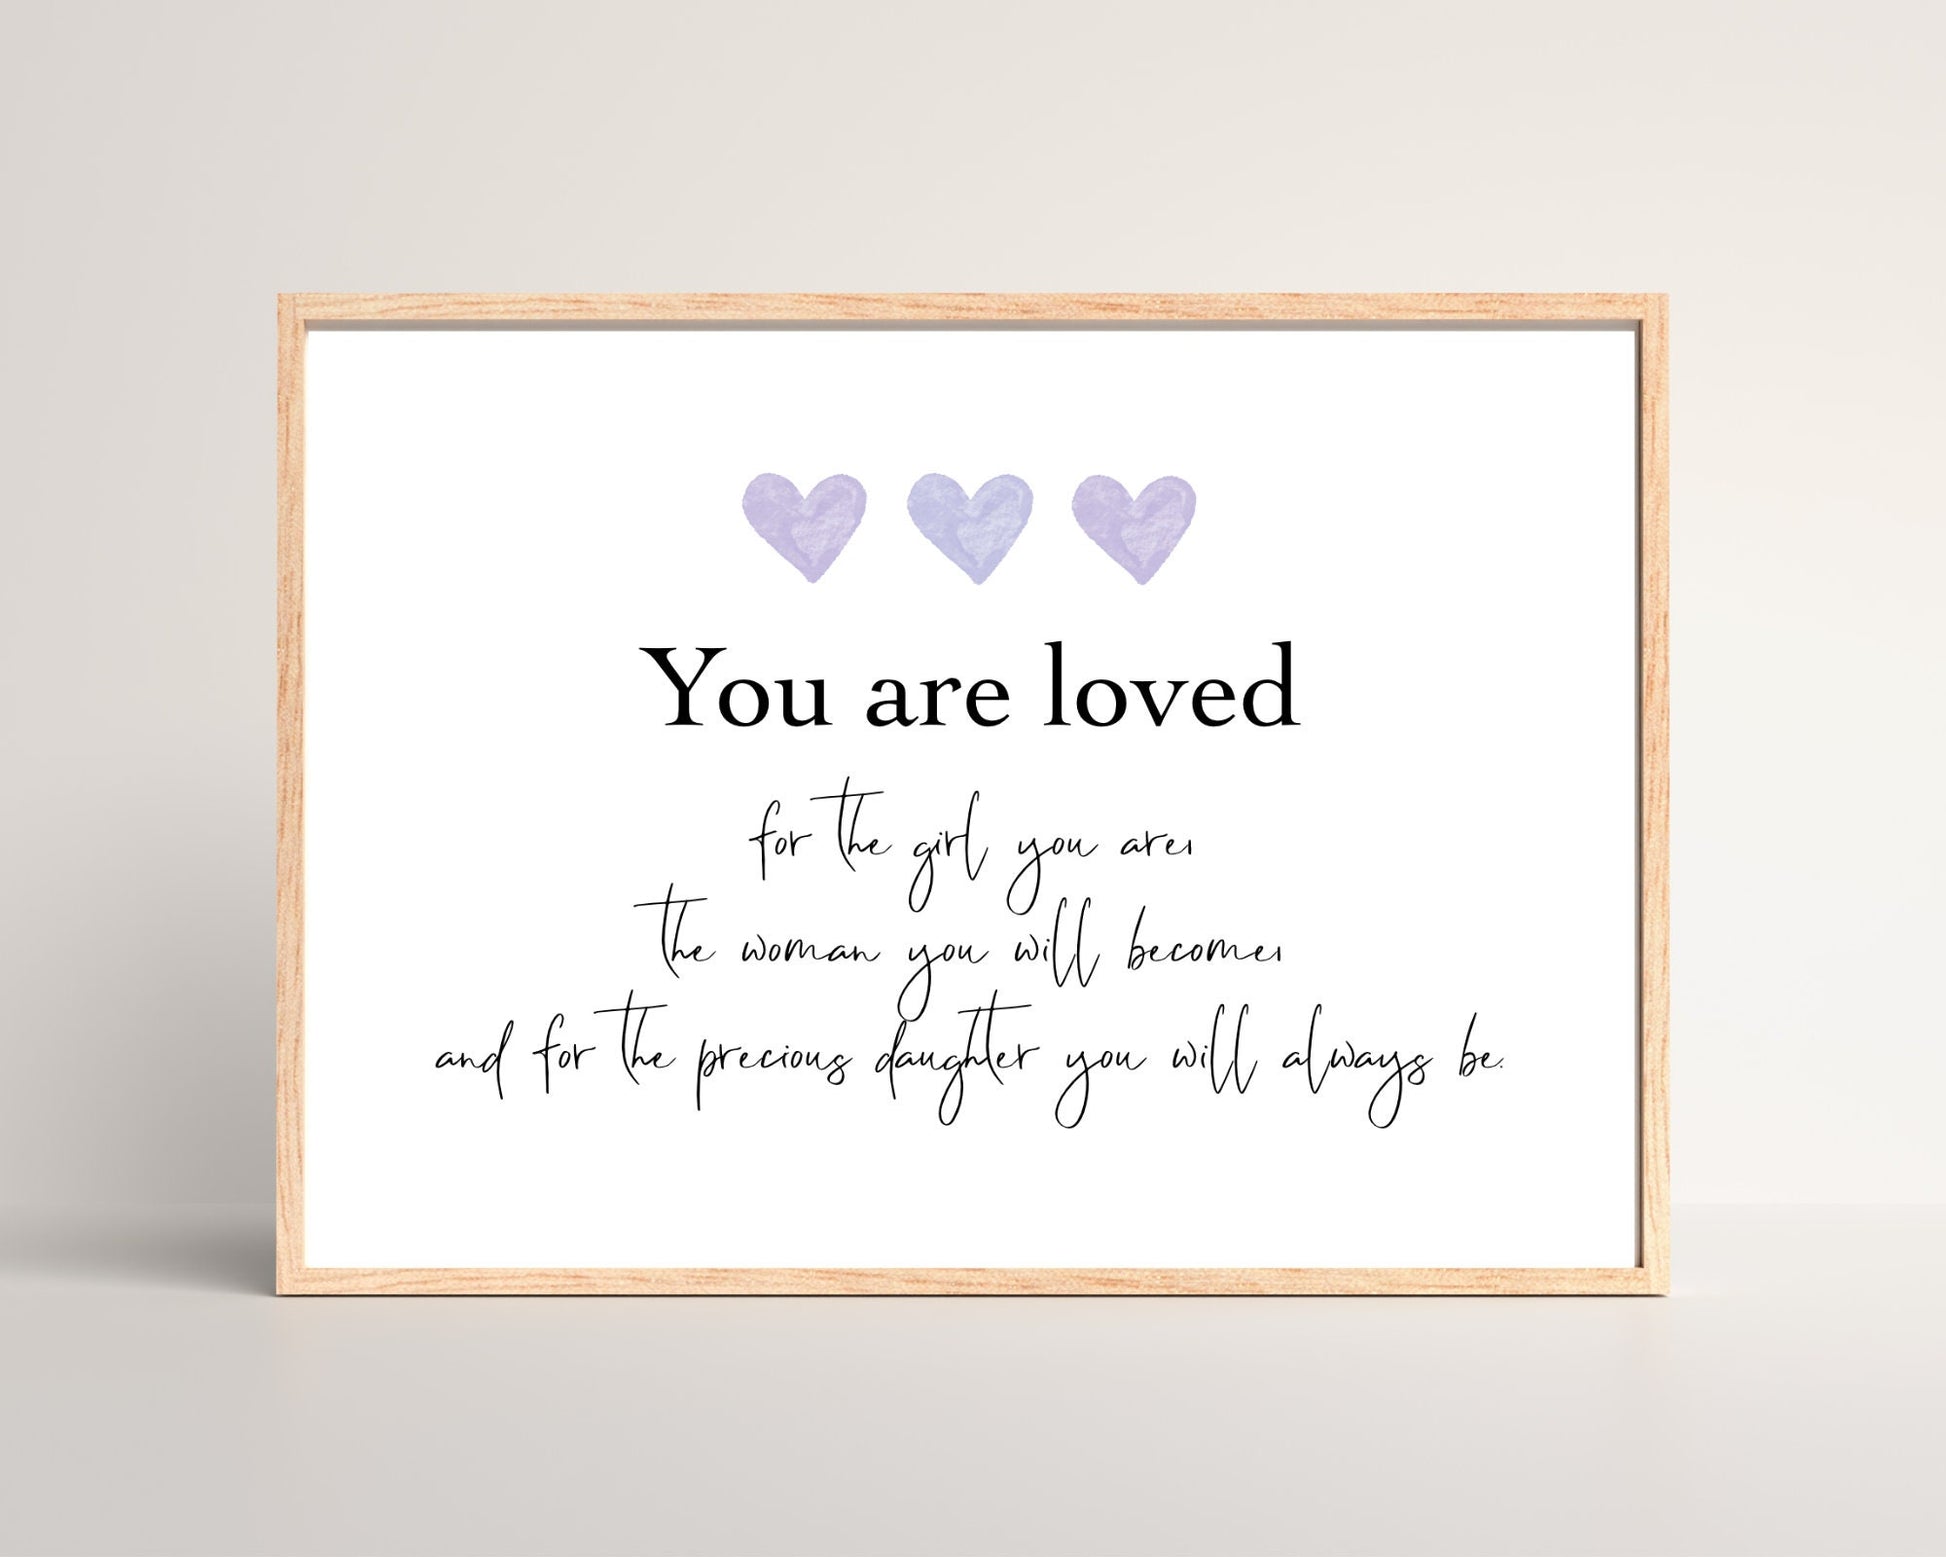 A little girl’s room digital poster that has three purple hearts at the top with a piece of writing that says: “You are loved for the girl you are, the woman you will become, and for the precious daughter you will always be.”